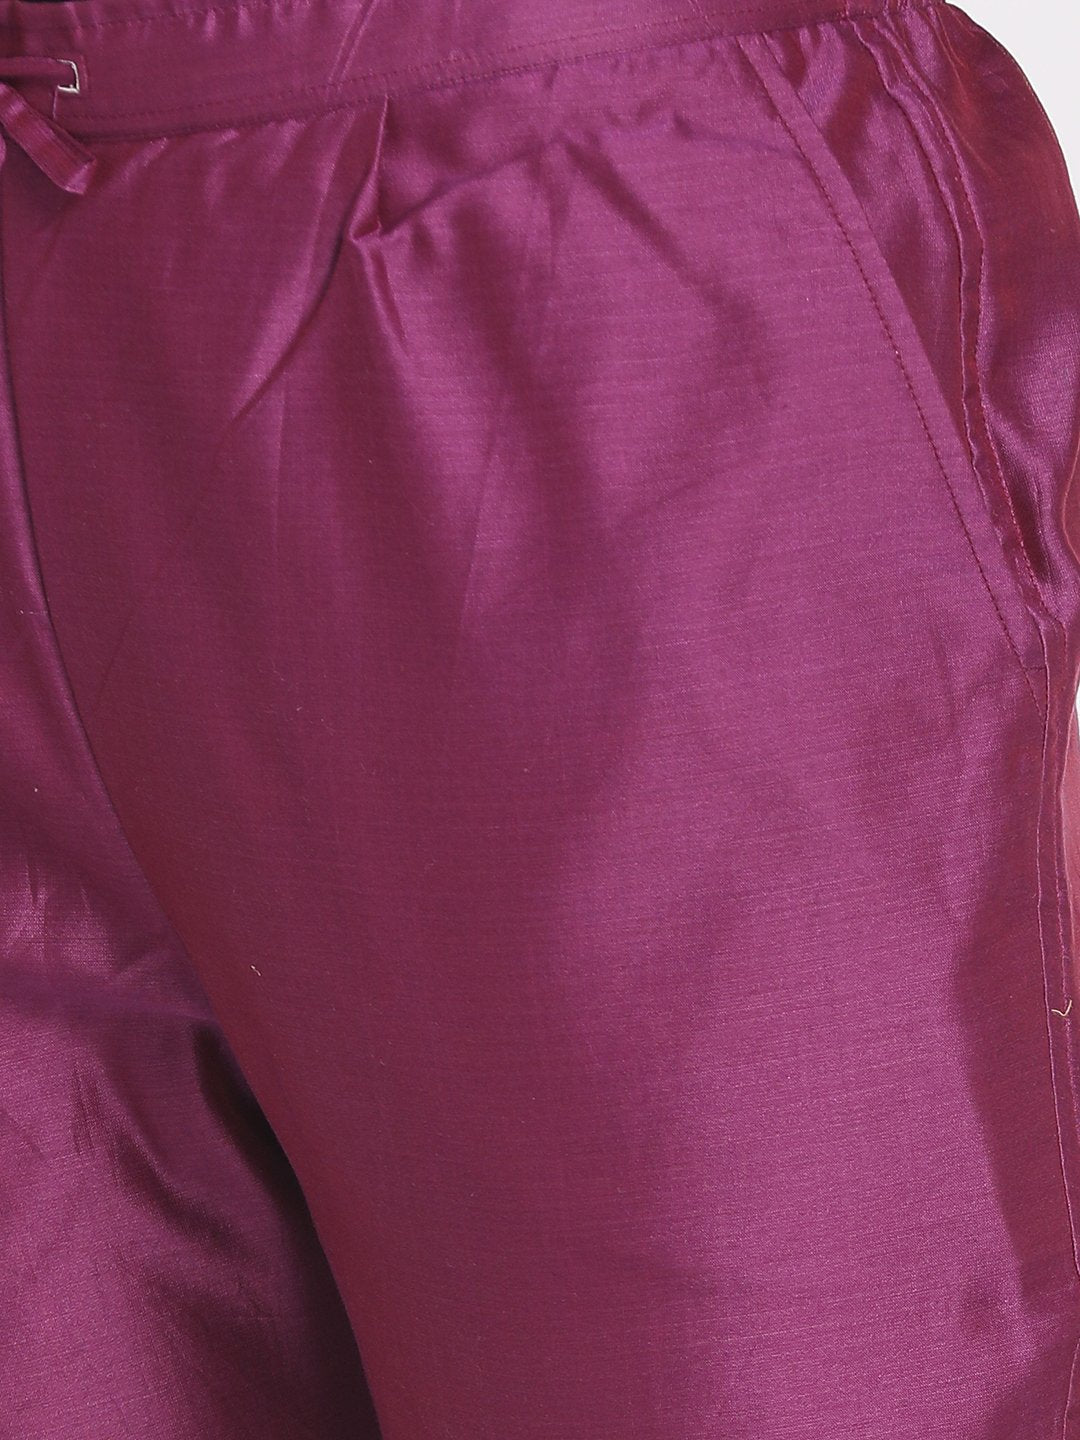 Pure chanderi purple solid cropped pant